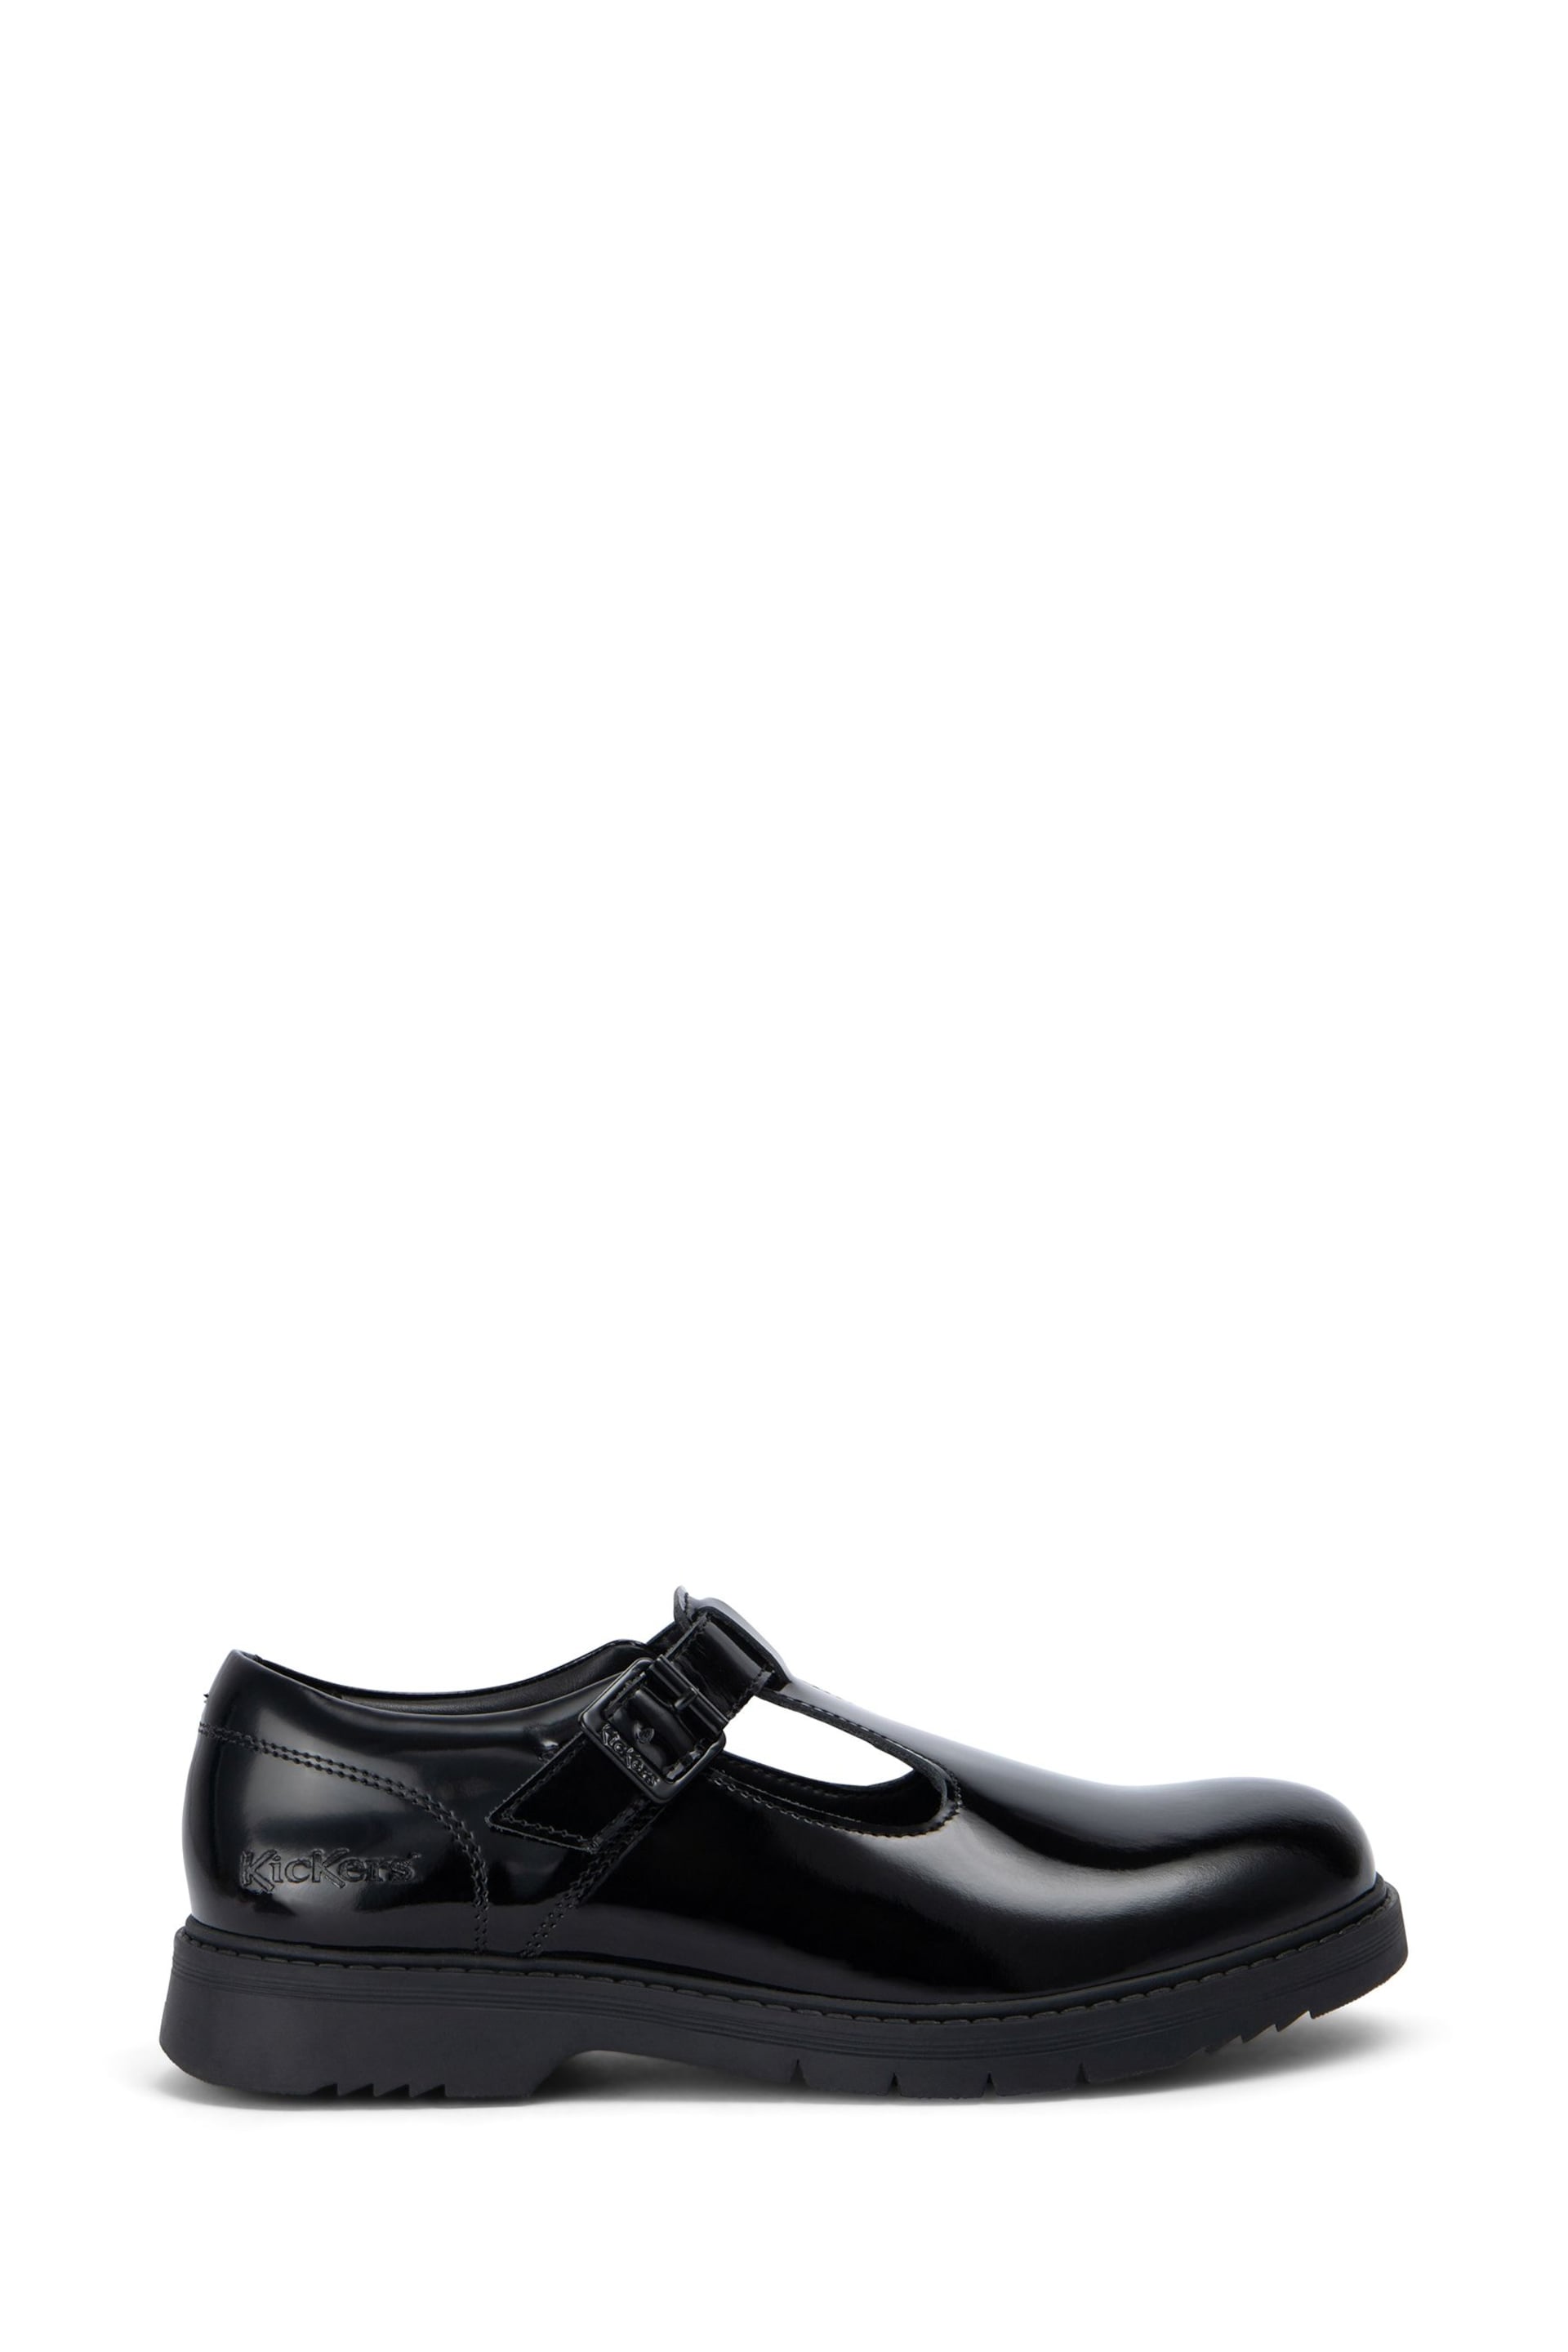 Kickers Youth Girls Finley T-Bar Patent Leather Black Shoes - Image 1 of 6